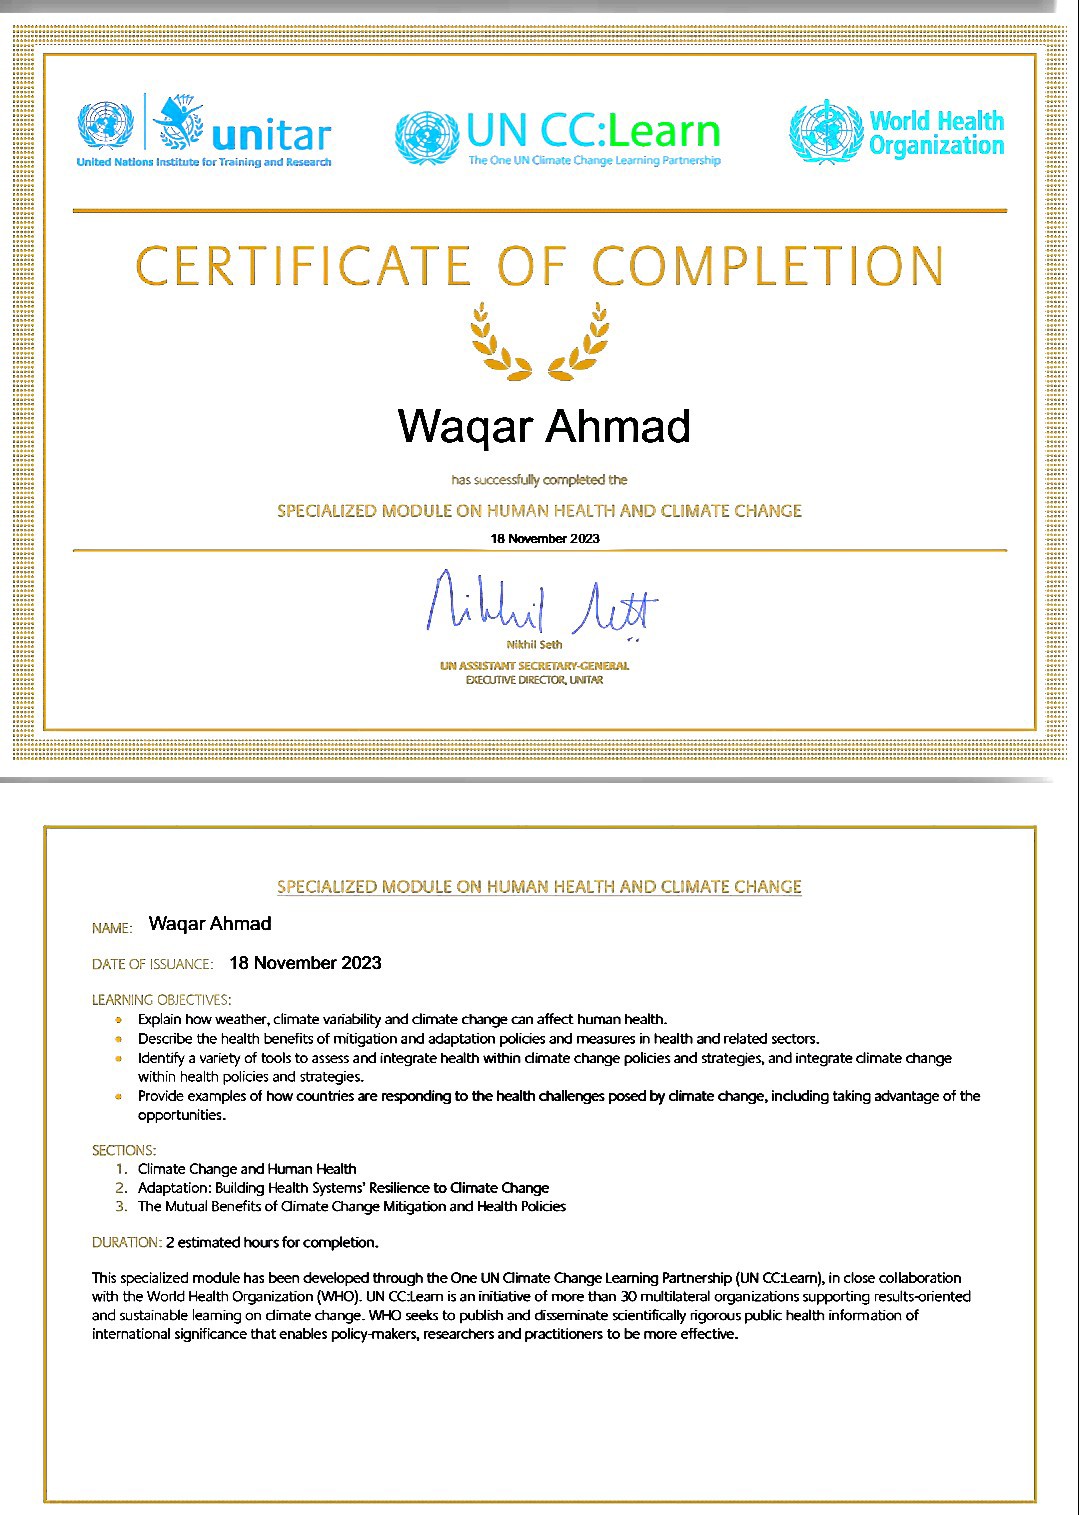 | Sunitar @UNCClearn  (@) tsi

Urns Notions eatotte foe Traeang ood Ramesh "

CERTIFICATE OF COMPLETION

Ns PO

Wagar Ahmad

as suxxesshily completed the
SPECIALIZED MODULE ON HUMAN HEALTH AND CLIMATE CHANGE
18 Noveymeay 273

NM Aur

Nana soon

U0 ASS TANT SLC TAY GNERAL
£3QT NaC ICR, LTA

 

 

 

SPECIALIZED MODULE ON HUMAN HEALTH AND CLIMATE CHANGE
wwe Wagar Ahmad
© 18 November 2023

 

Deicbe the “eal? Lenehts of MDgDoN 3nd KERKI00N oboe Jd Mesures i health nd felted 1on.
10Anty 3 ety of 00K 10.3347 ING IEAGFILE DENI WATT AMate Cage ORS 3d LITERS, ING INte(rate Chrmate change
WE eg po nd steges,

© Prova exympkes of how Counties are responding to the health challenges posed by demate change, INCuding tong XNaNLage of the
opoortunbie

© Epa how weather. Chmate vanity and chmite CANge Can affect Paman healh

 

1 Cimate Change and Human Health
2 Adaptatan Buidng Heath Systems’ Reshence to imate Change
5 The Mutual Berehi, of Oumate Qunge Mibgation and Health Raises

 

2 estimated hours for completion,

Ths so6c 3 rect module has been developed Tough the One UN Climate CRange | 6ameng Partner sp (UN CC 16am). in ci04 collaboration
WB the Wk! Pelt O gam ston (WHO) UN CC Learn ran wstistive of more thon 10 imubisteral organizaborm spring nit onented
30st Sabie eating on dinate Gunge WHO wert a publish and drmminate sorely agora public health mkornasor of

neat 5nal Lane CaNCe that enables pORCY MIKES, rE7eXChers and PrXtoners o be more effective.